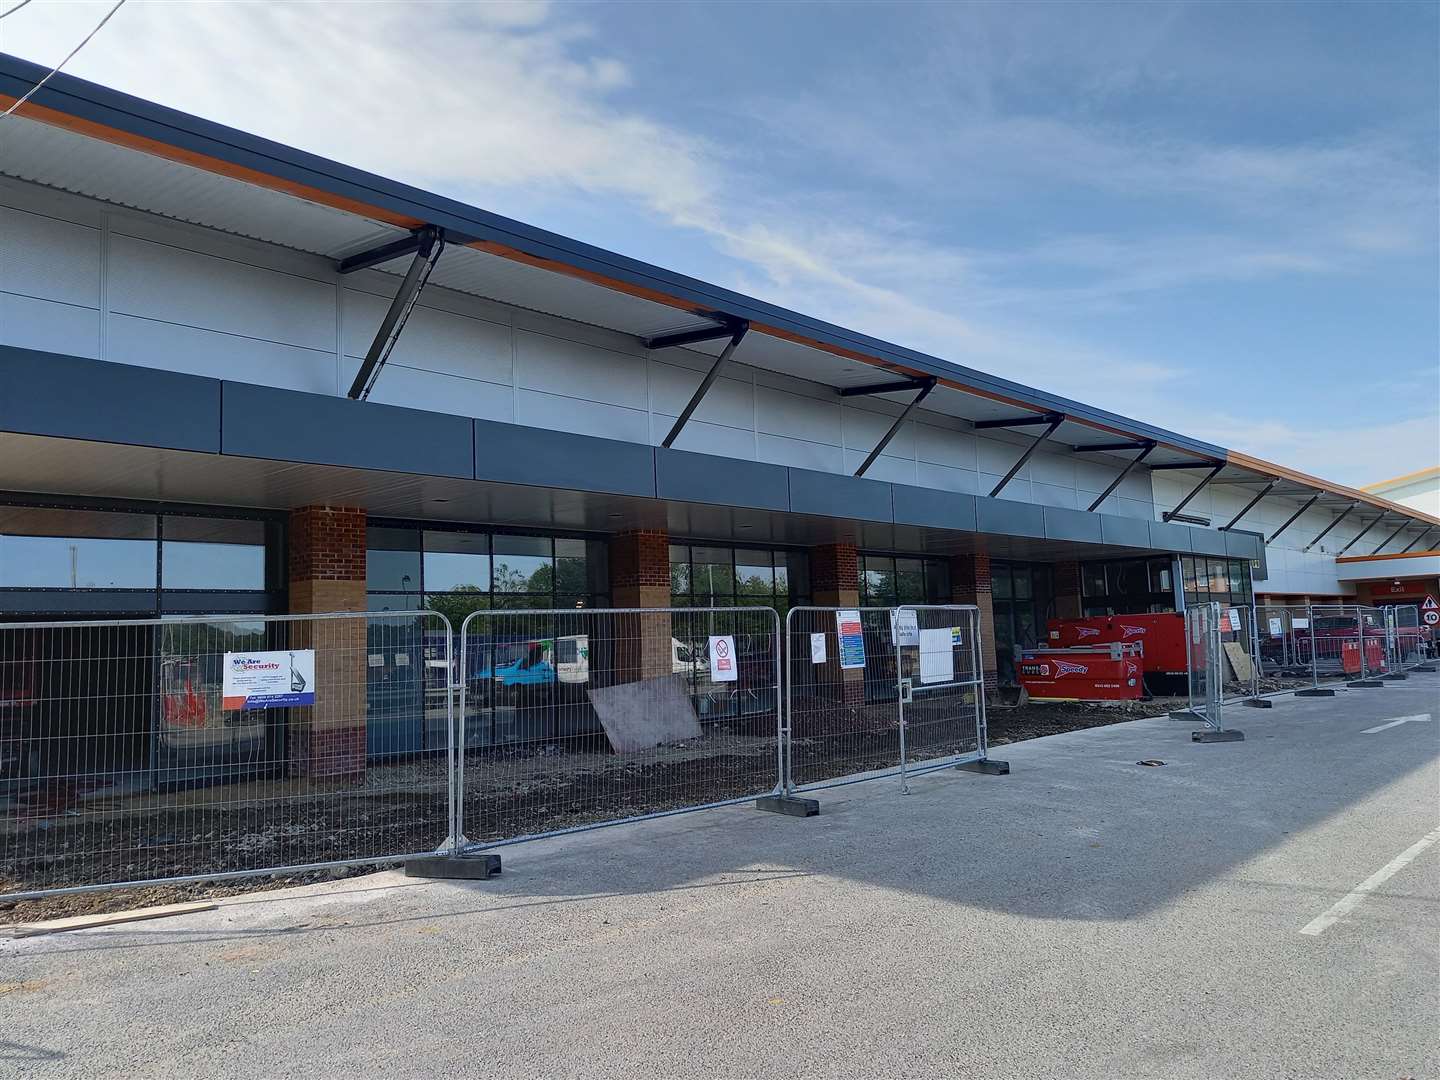 The Aldi supermarket will be ready in early October